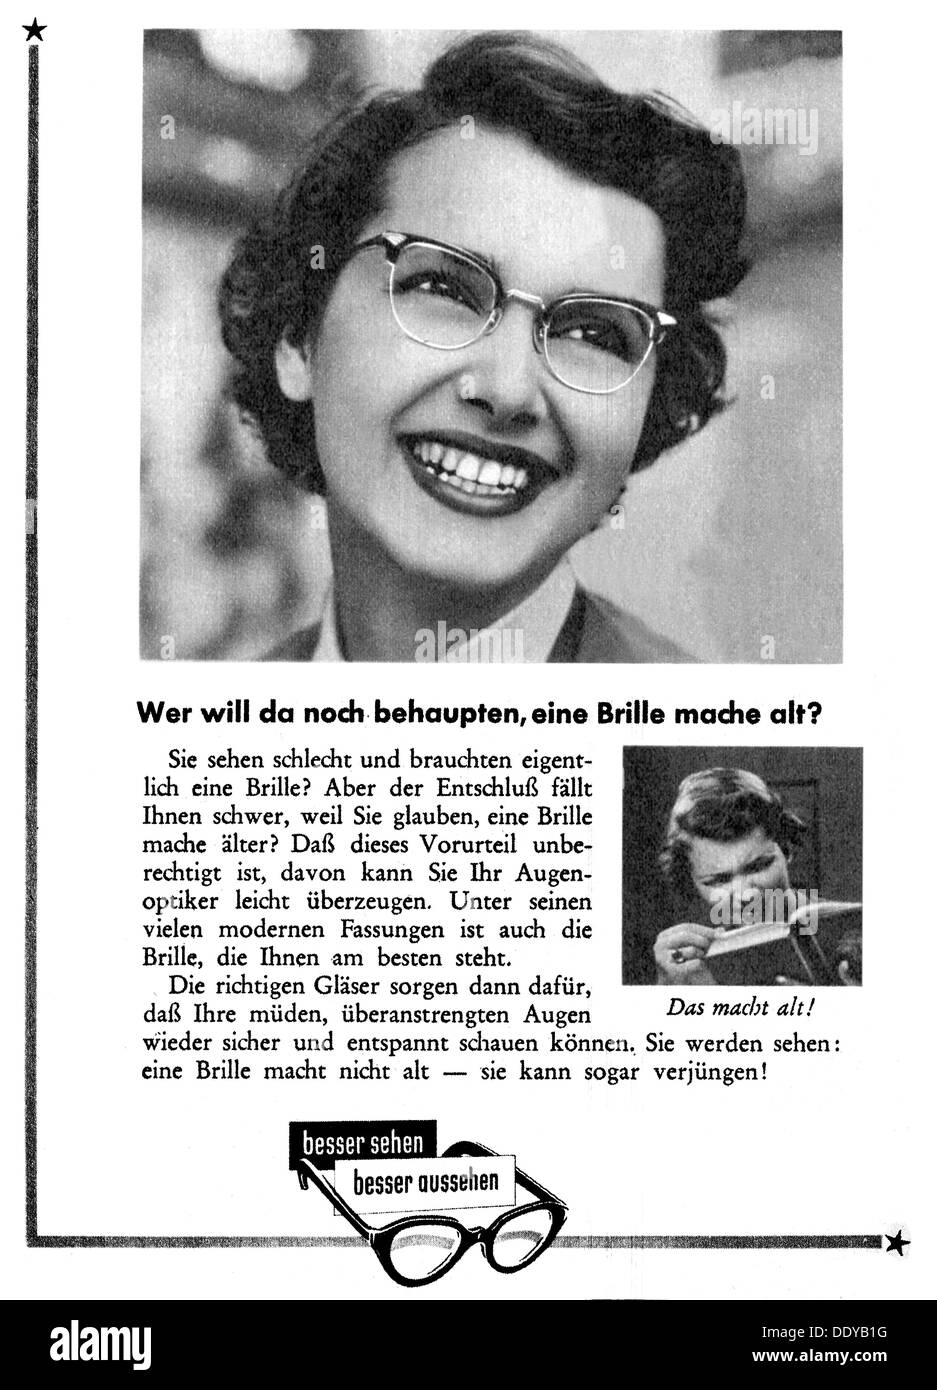 advertising, medicine, advertisement promoting the wearing of glasses, 1954, Additional-Rights-Clearences-Not Available Stock Photo